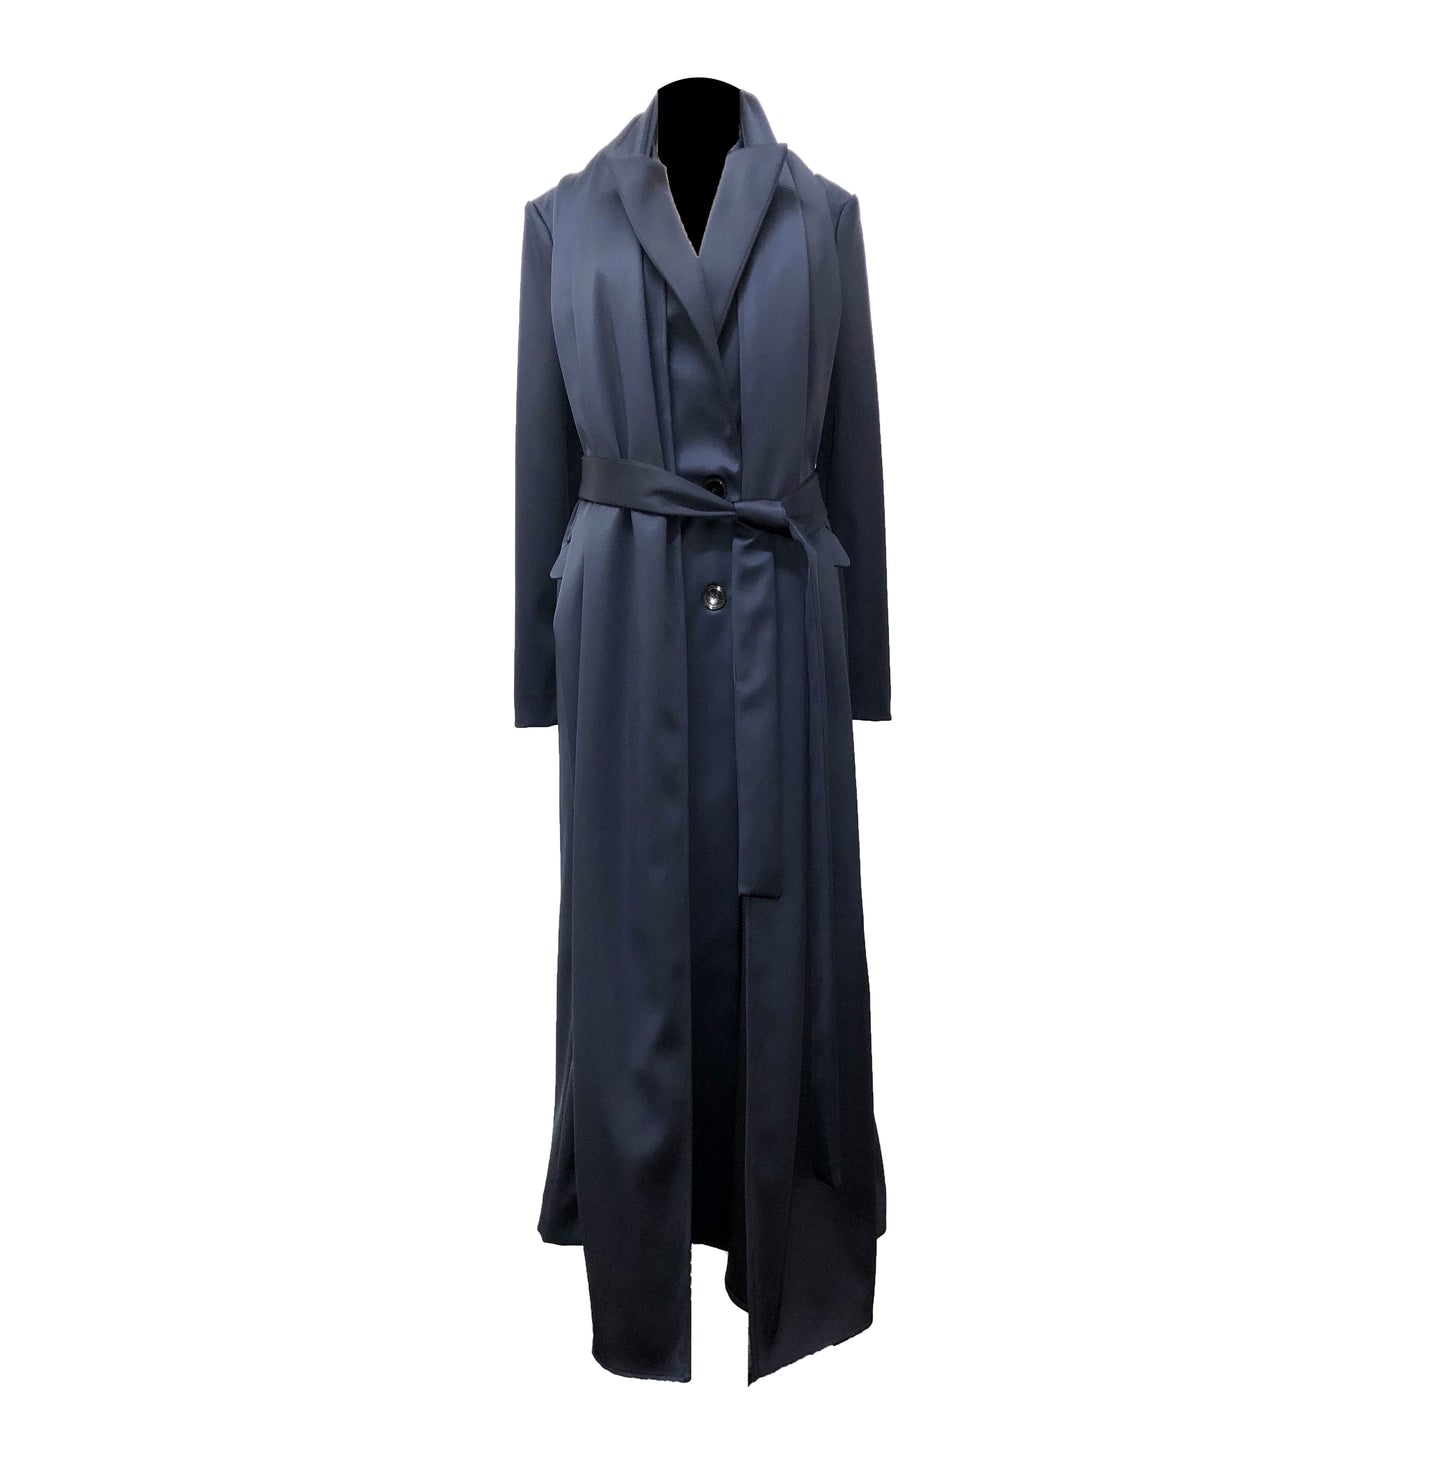 Navy stretch satin coat with transformable zippers and self tie belt